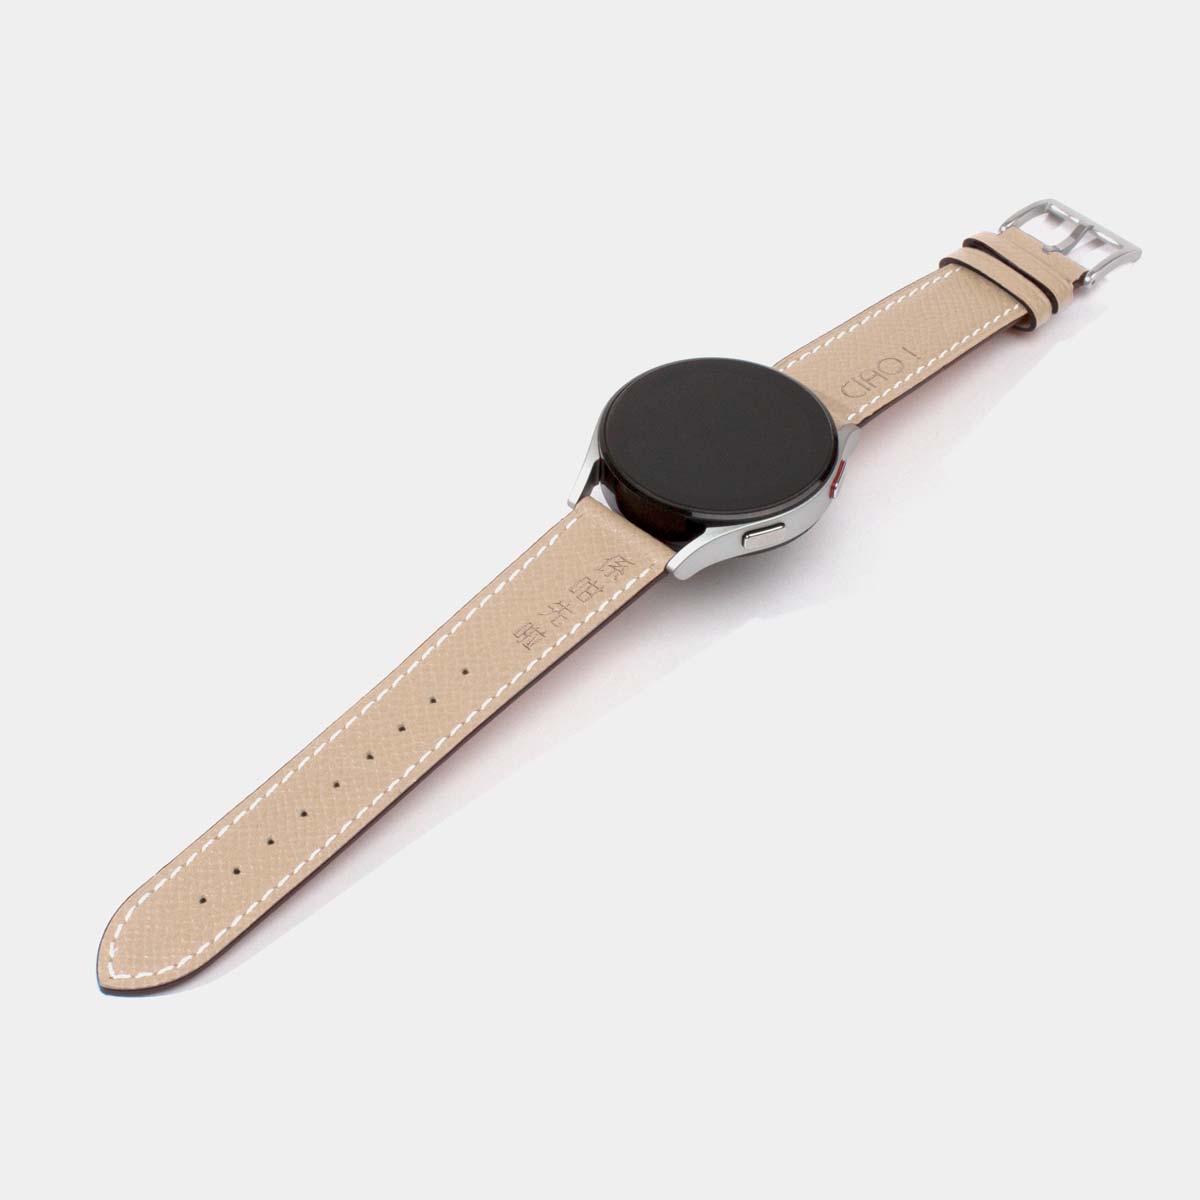 Customized Lettering Watch Strap | Samsung Smart Watch | Jessenia Original Jessenia Original